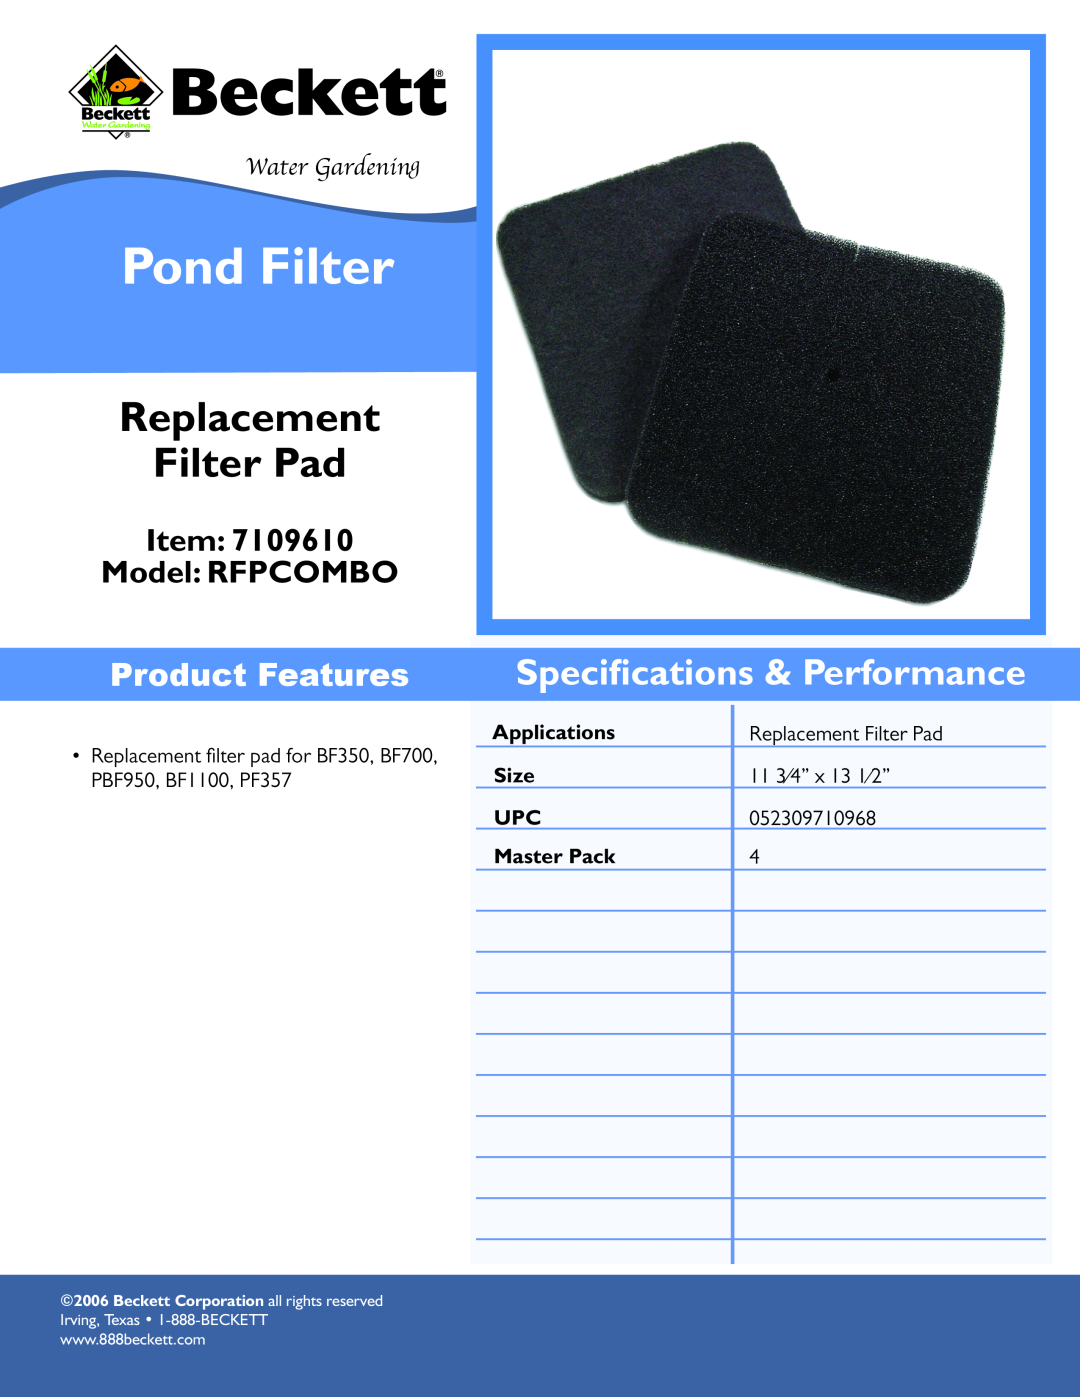 Beckett Water Gardening RFPCOMBO specifications Pond Filter, Replacement Filter Pad, Speciﬁcations & Performance, Size 